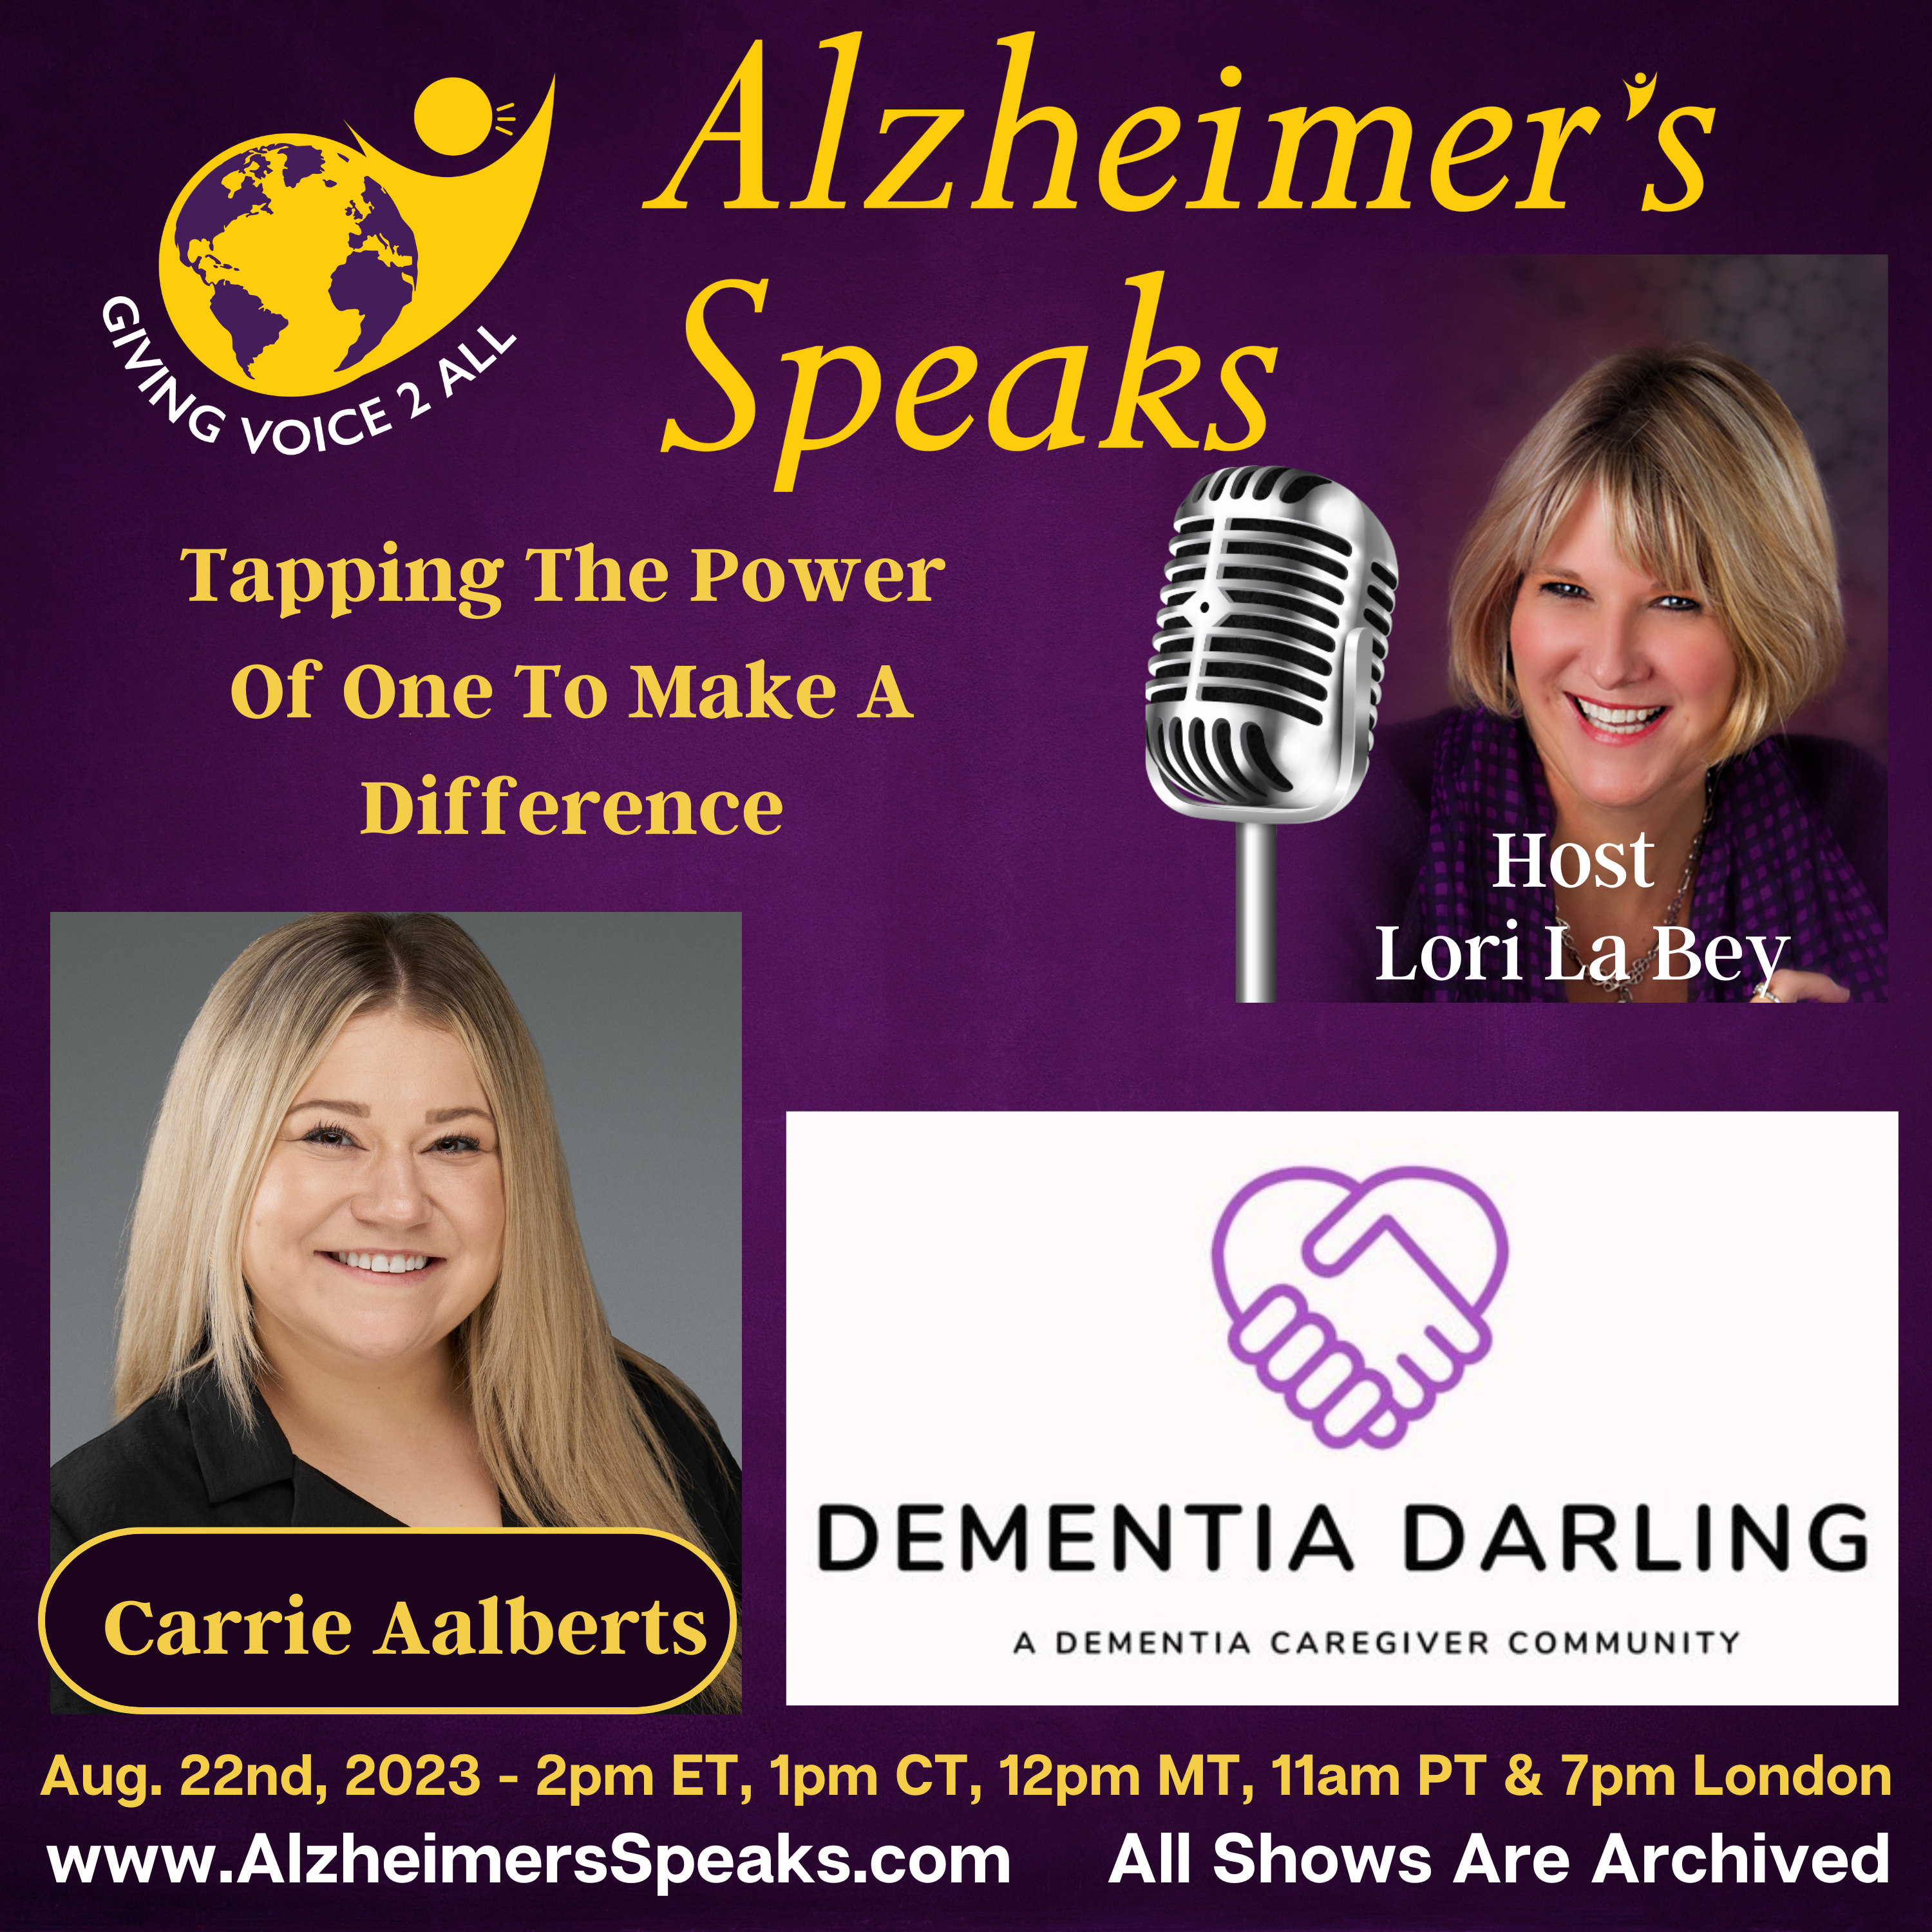 Dementia Darling - Supporting Families on Their Journey